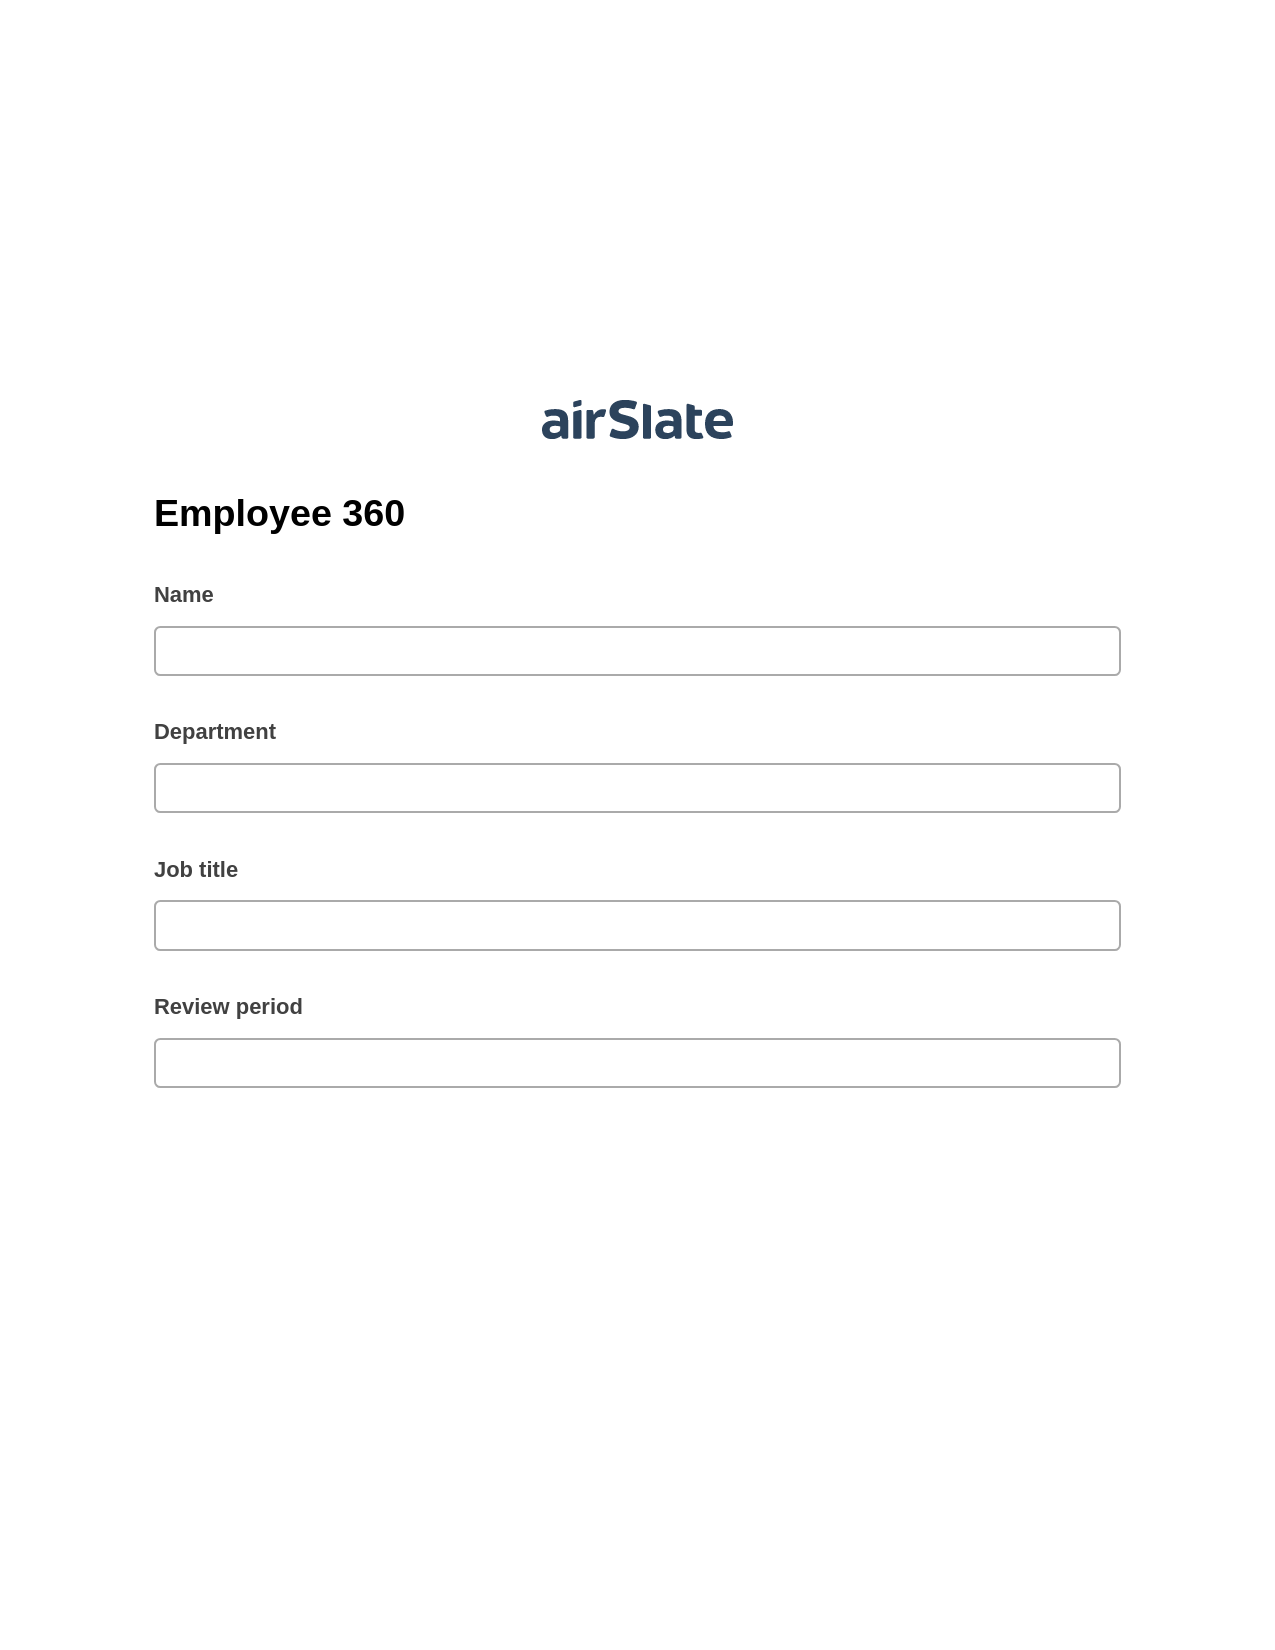 Employee 360 Pre-fill from CSV File Bot, Send a Slate with Roles Bot, Archive to Box Bot